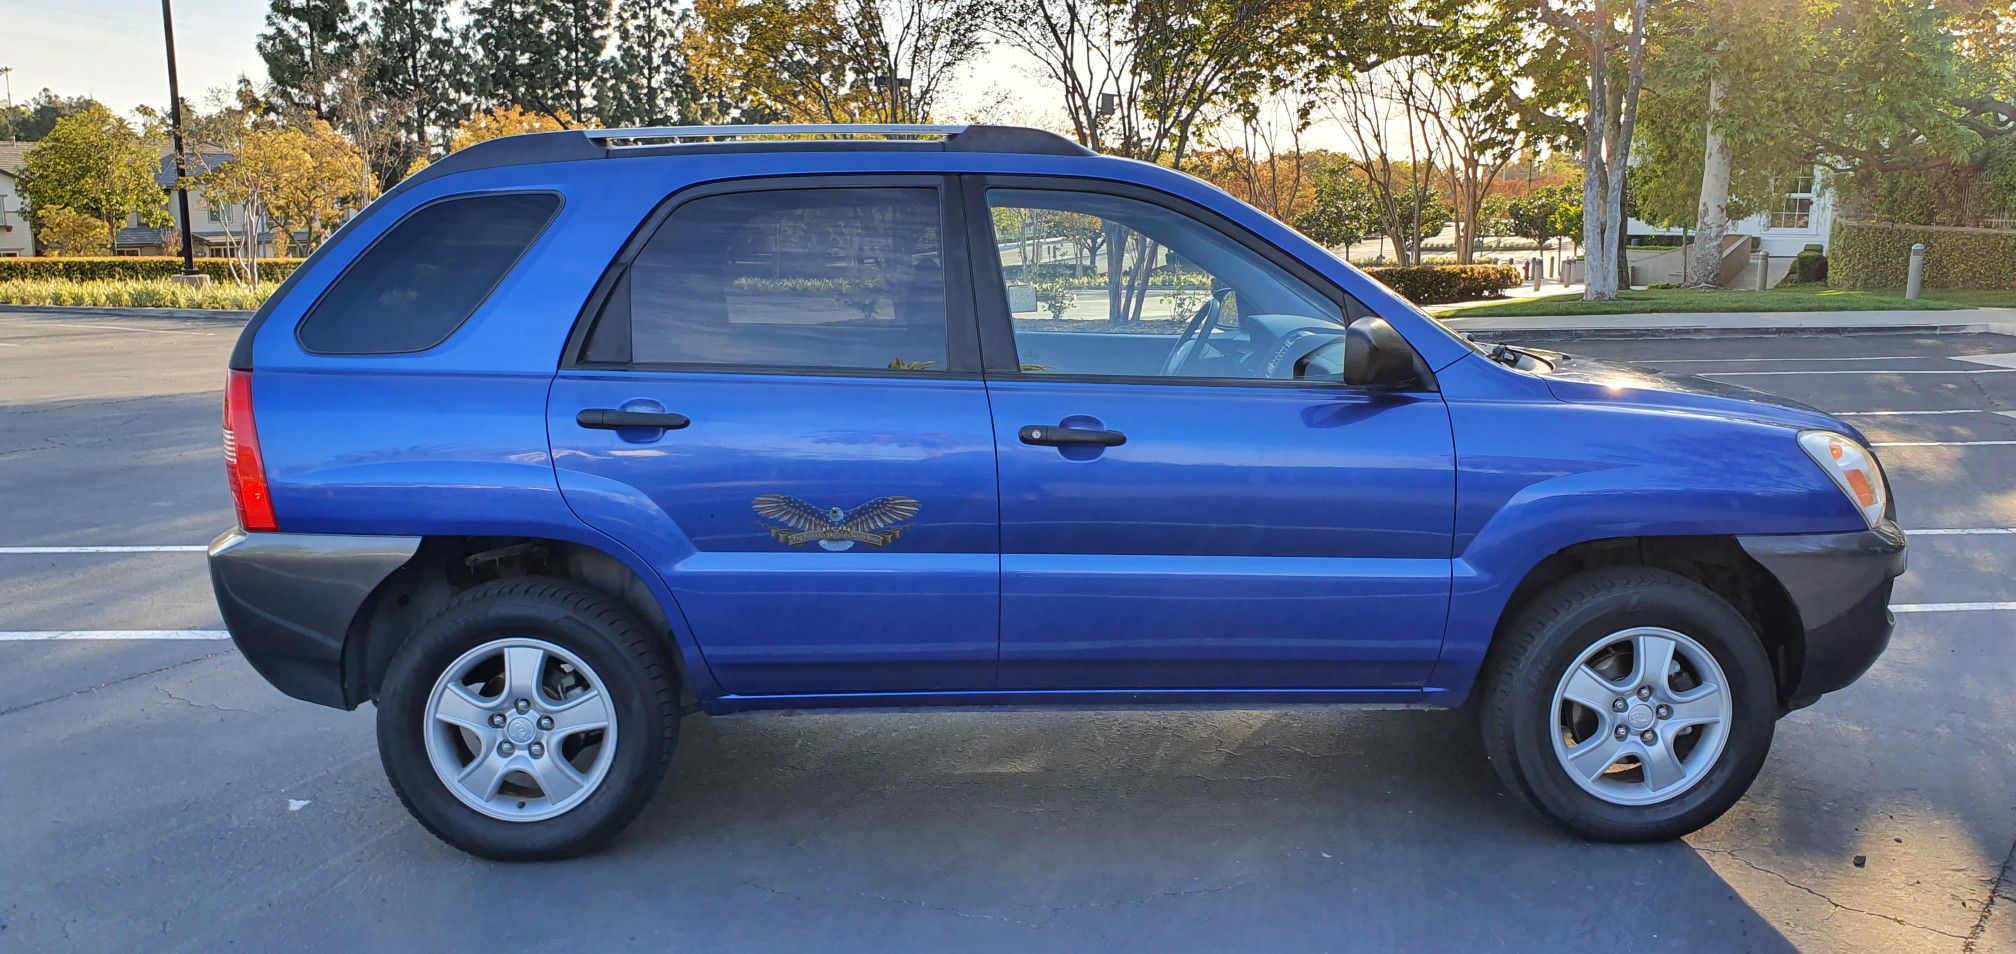 2006 KIA SPORTAGE LX MANUAL TRANSMISSION 4CYL SUV*CLEAN TITLE*ONE OWNER*LIKE NEW*VERY LOW MILEAGE 54K.